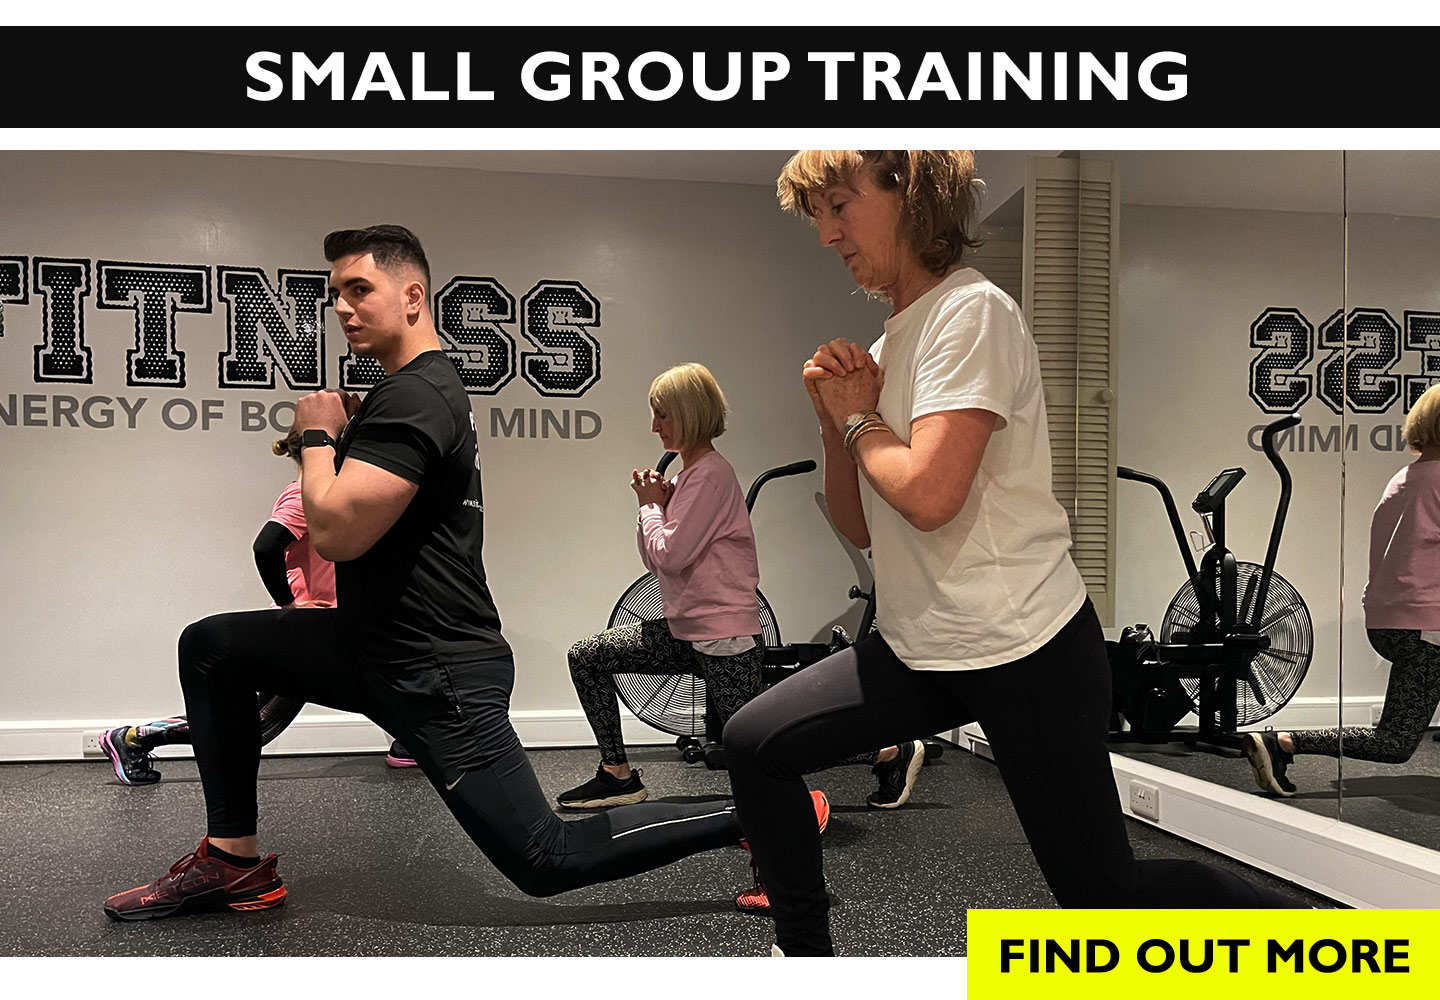 Small group training session at the gym studio - find out more.